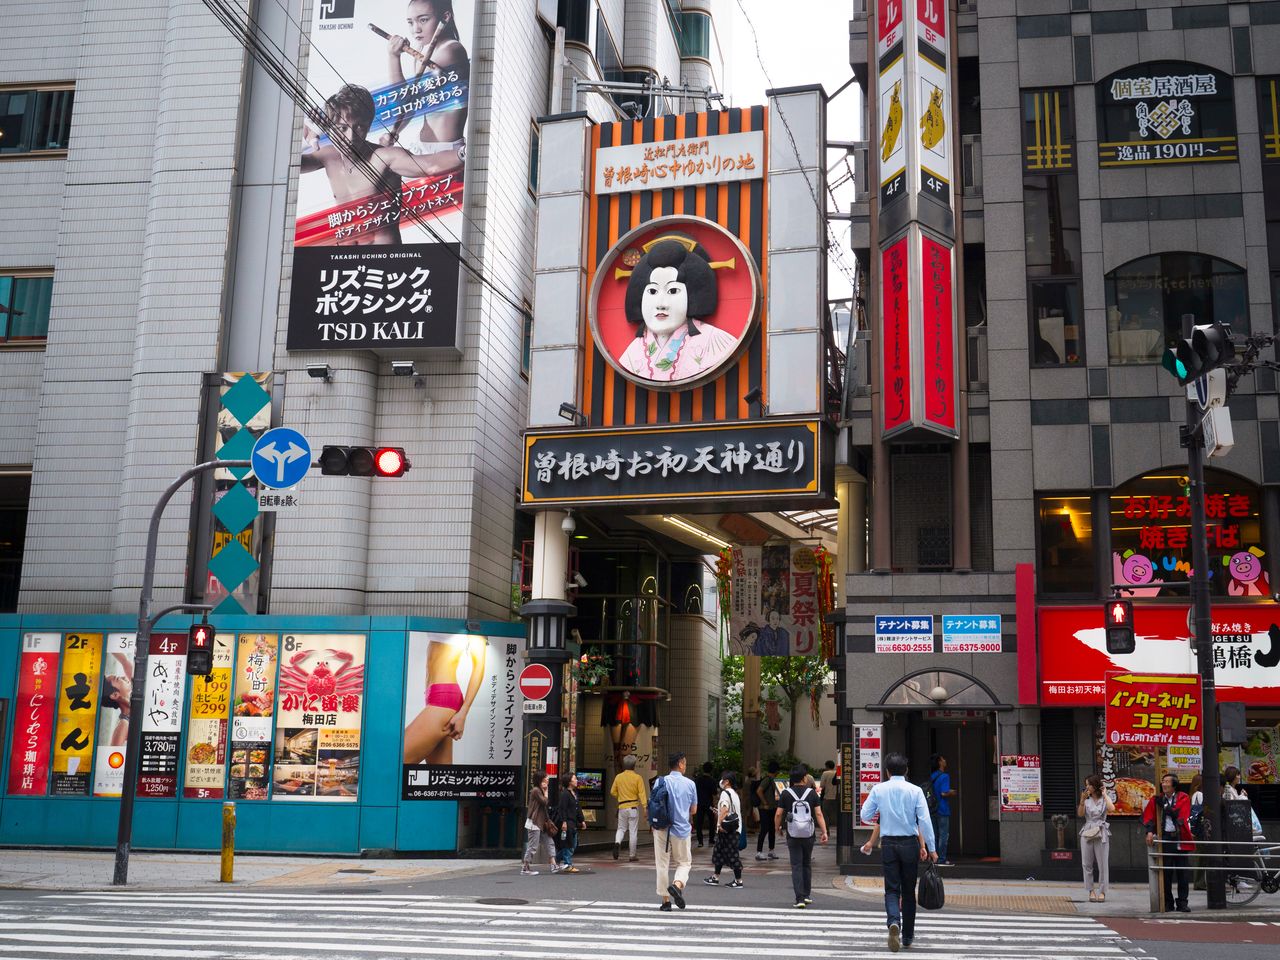 Typical Osakan shopping arcades and underground malls may also be found in Kita. This photo shows the Sonezaki Ohatsu Tenjin-dōri arcade.